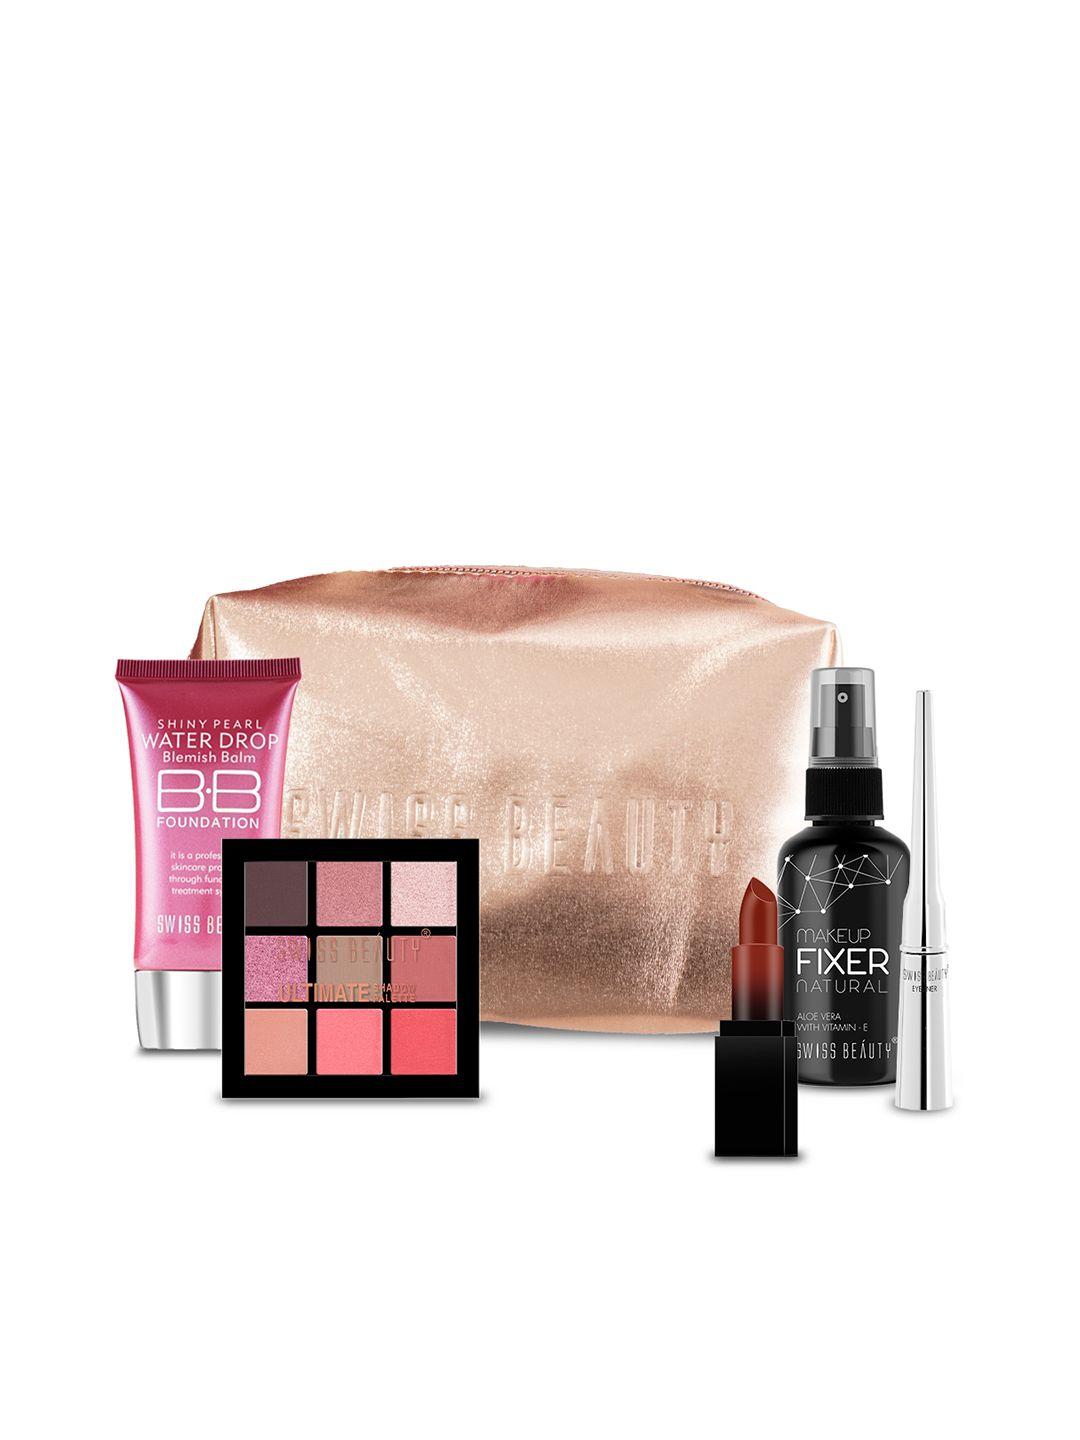 swiss beauty must have makeup gift set